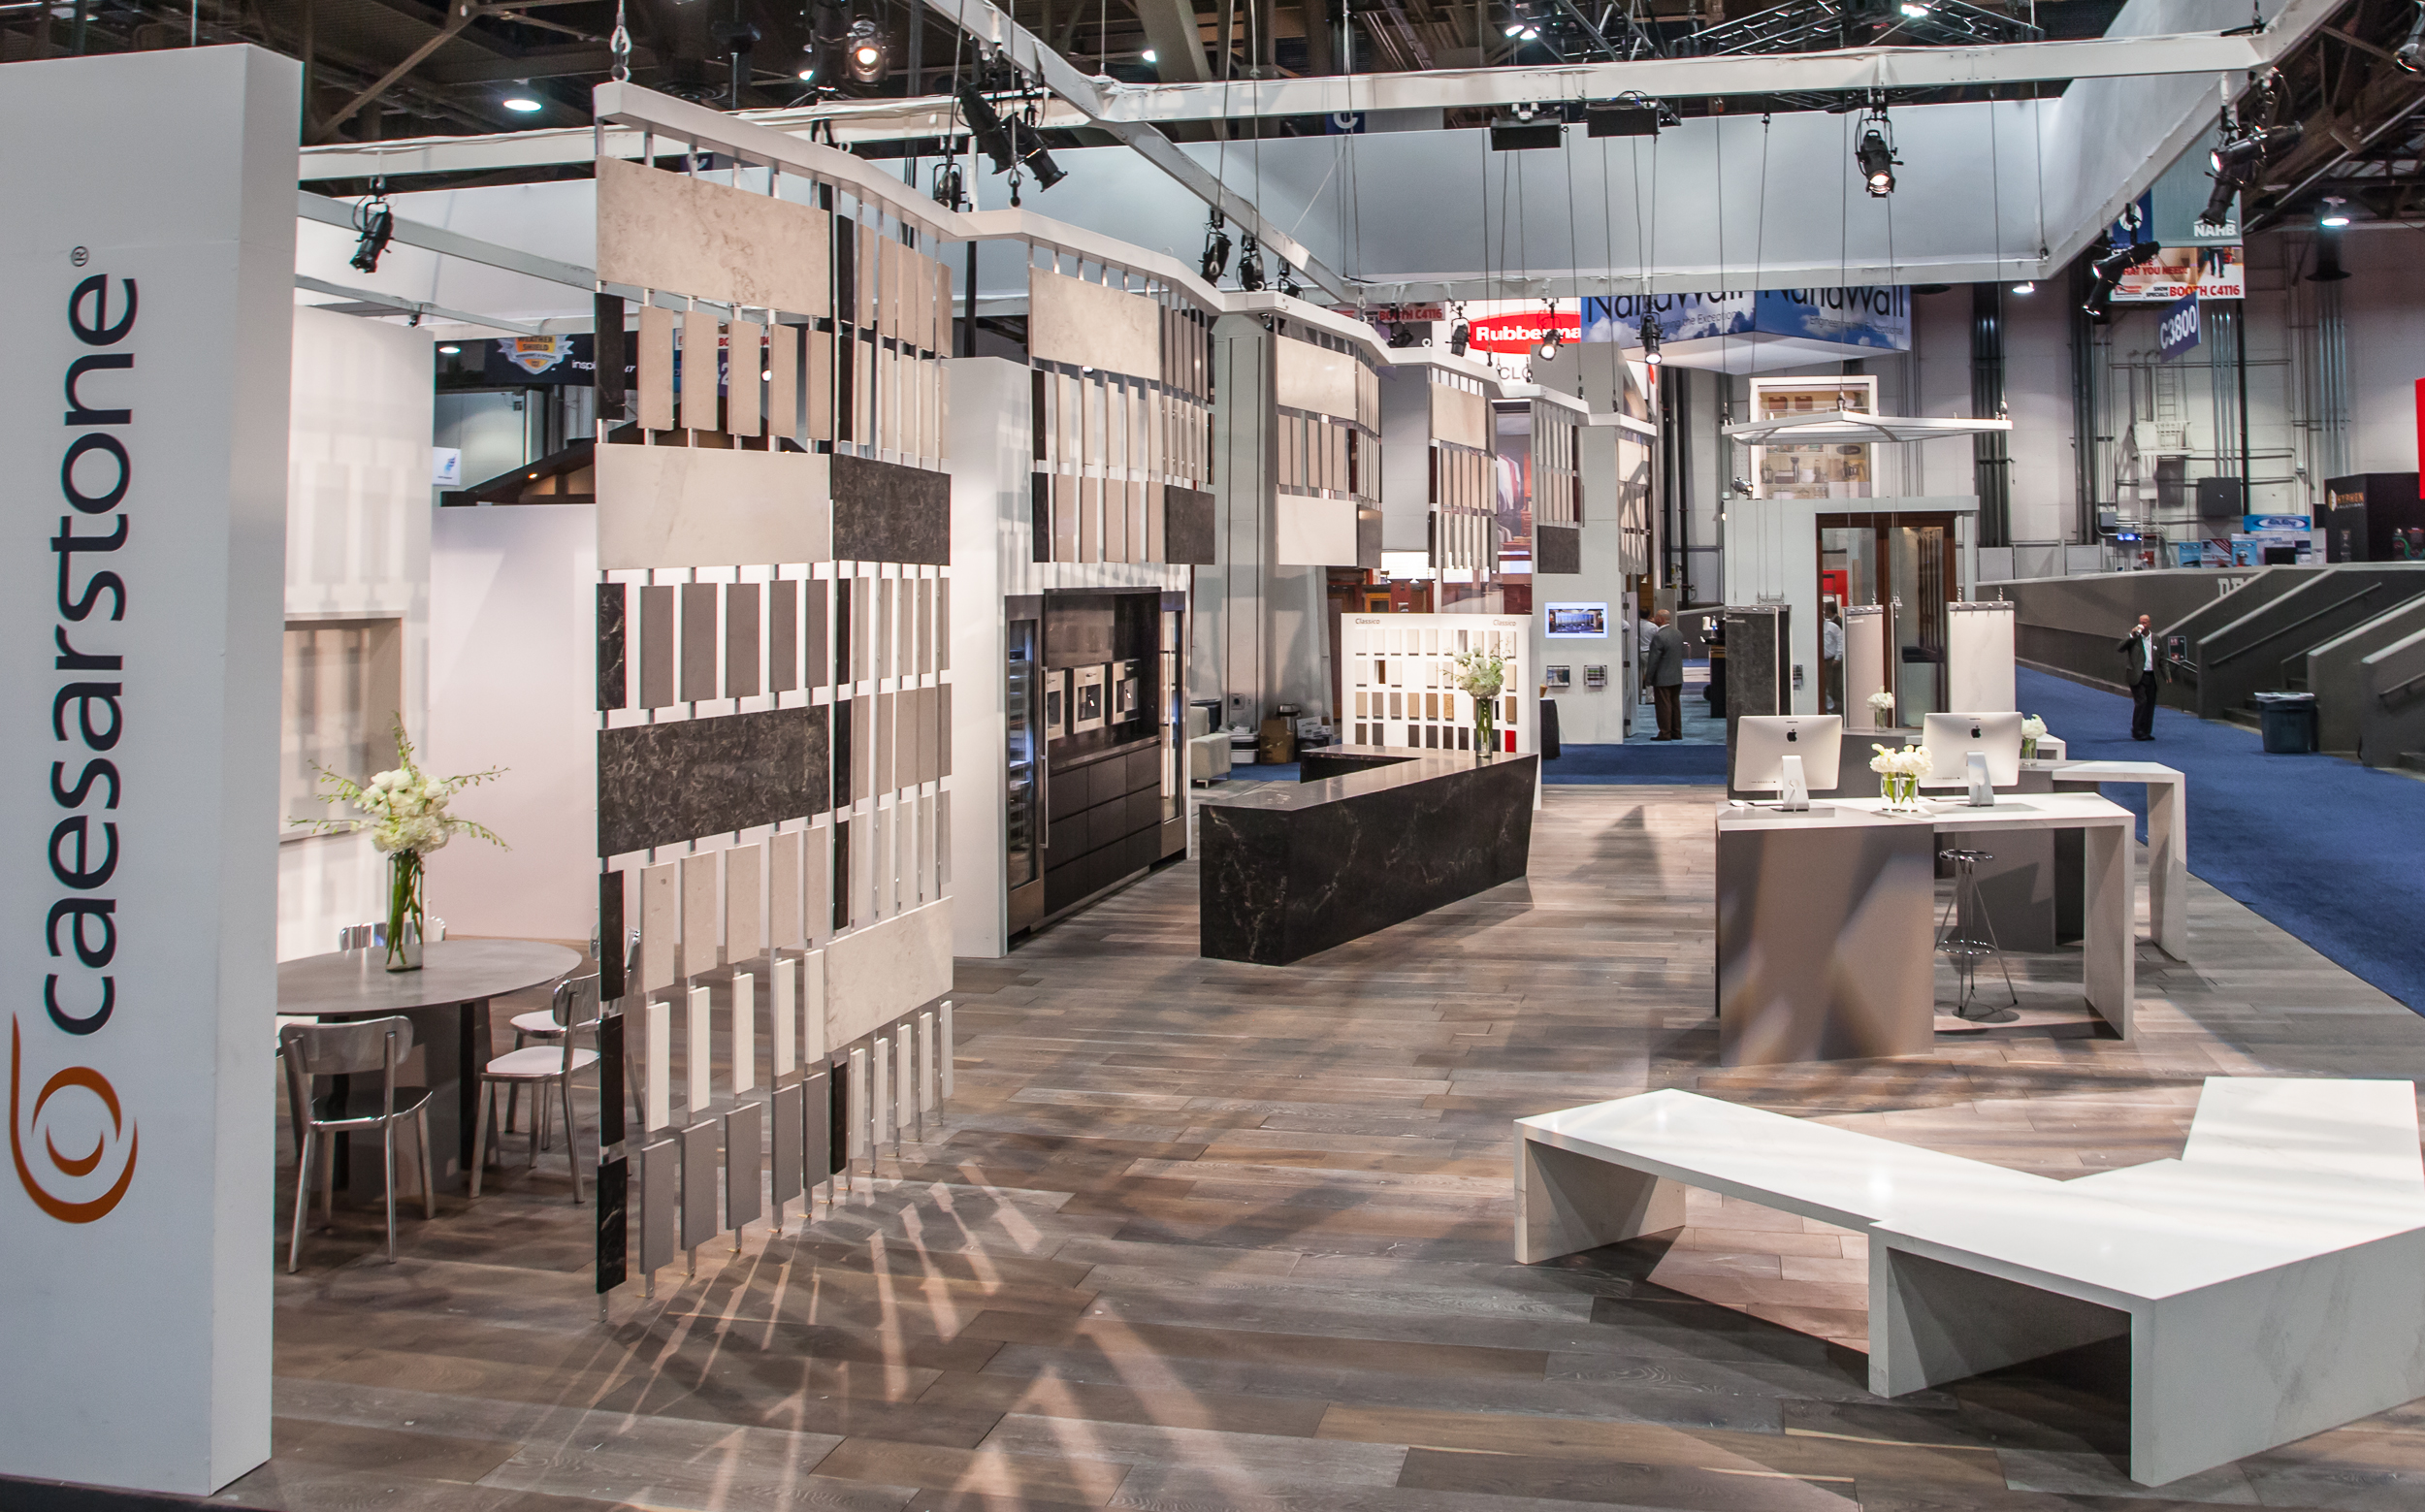 Caesarstone Launches New Concrete and Granite Inspired Series at International Builders Show (IBS) 2015